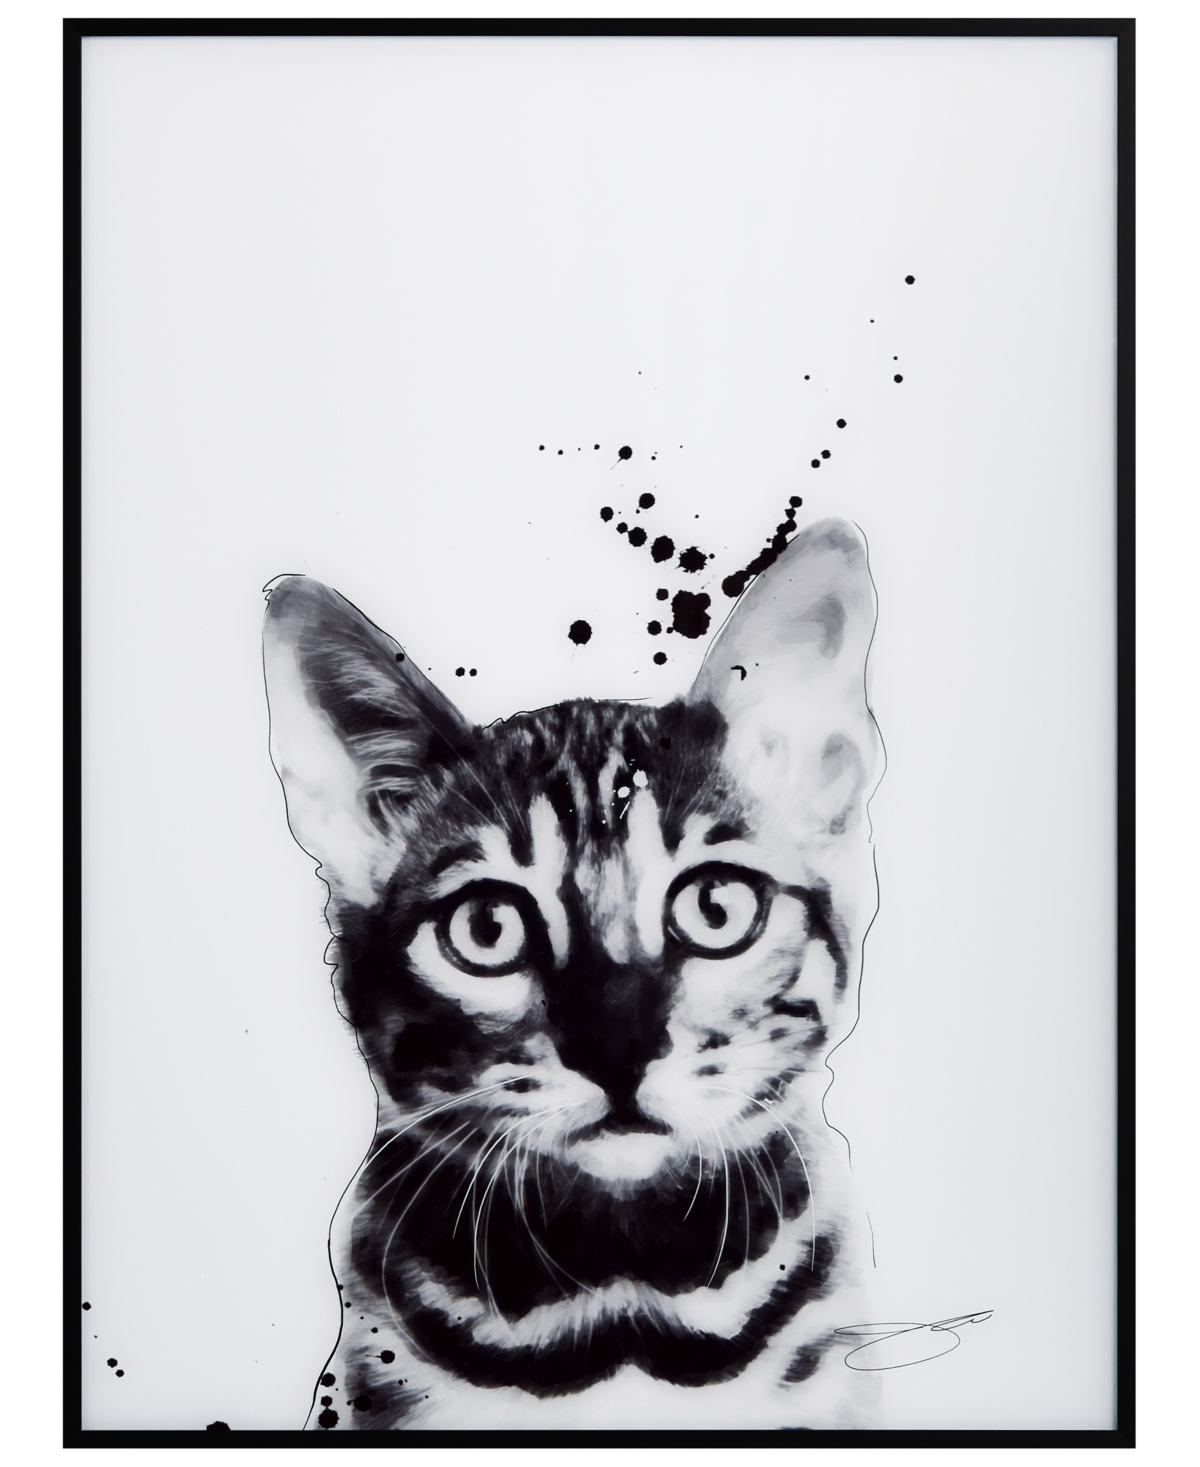 Empire Art Direct "bengal Cat" Pet Paintings On Printed Glass Encased With A Black Anodized Frame, 24" X 18" X 1" In Black And White